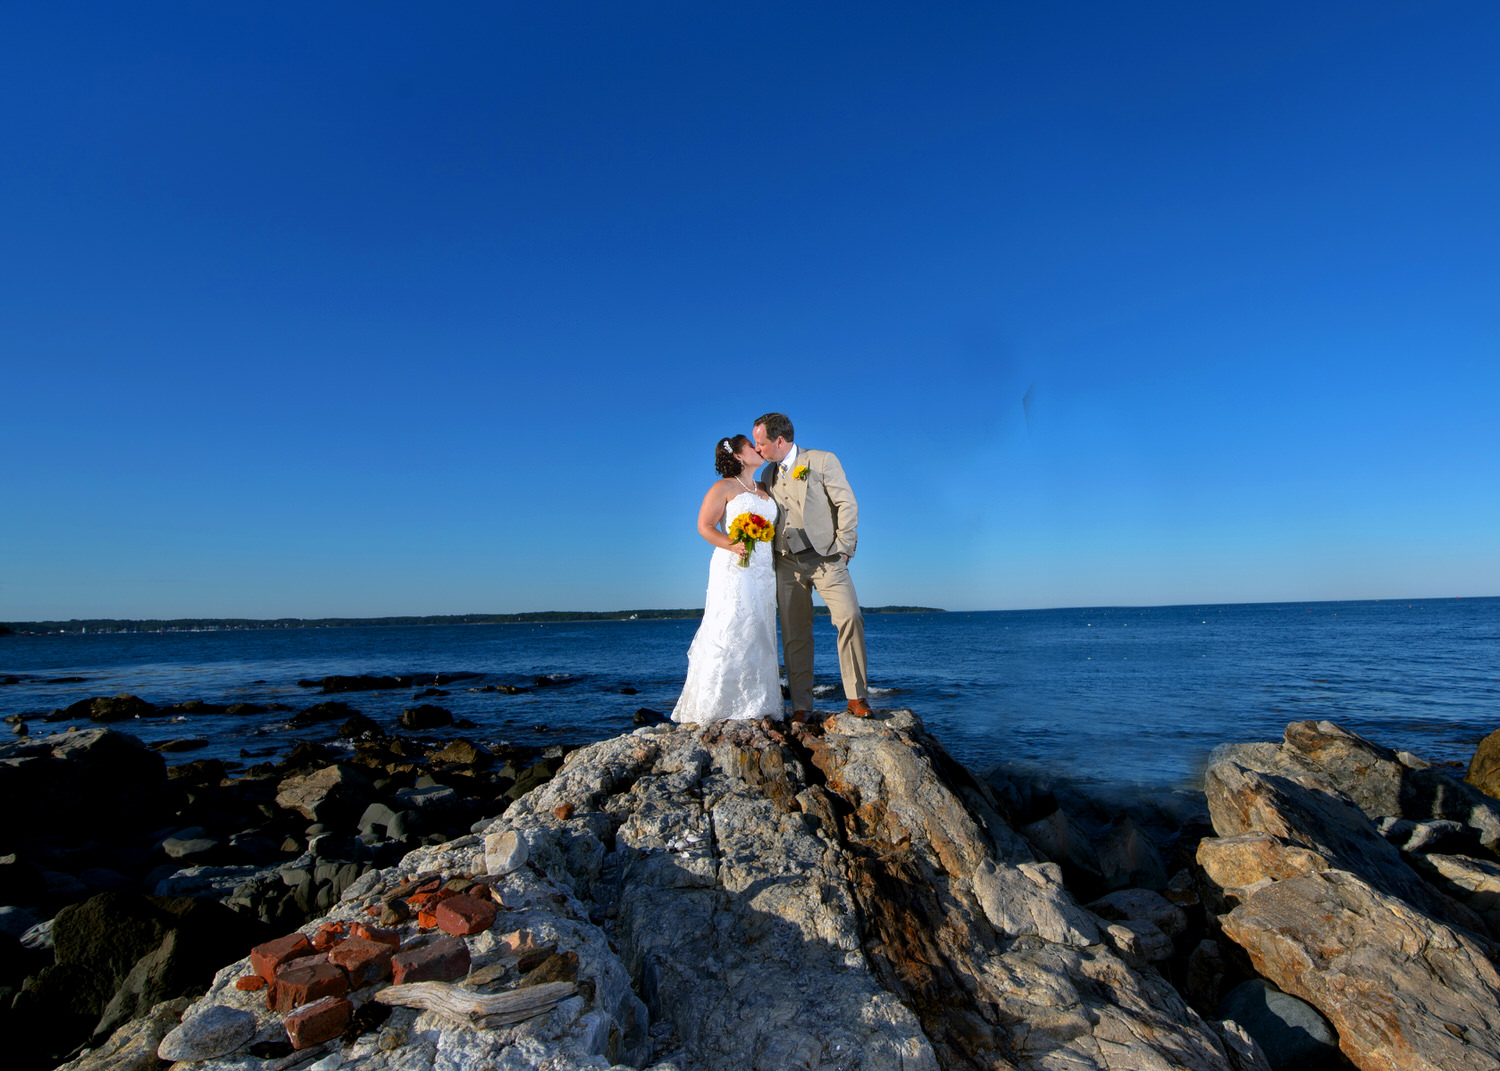 Bride and groom sharing a kiss on a rocky shore with the ocean stretching into the horizon under a clear blue sky showing wedding photography tips for couples